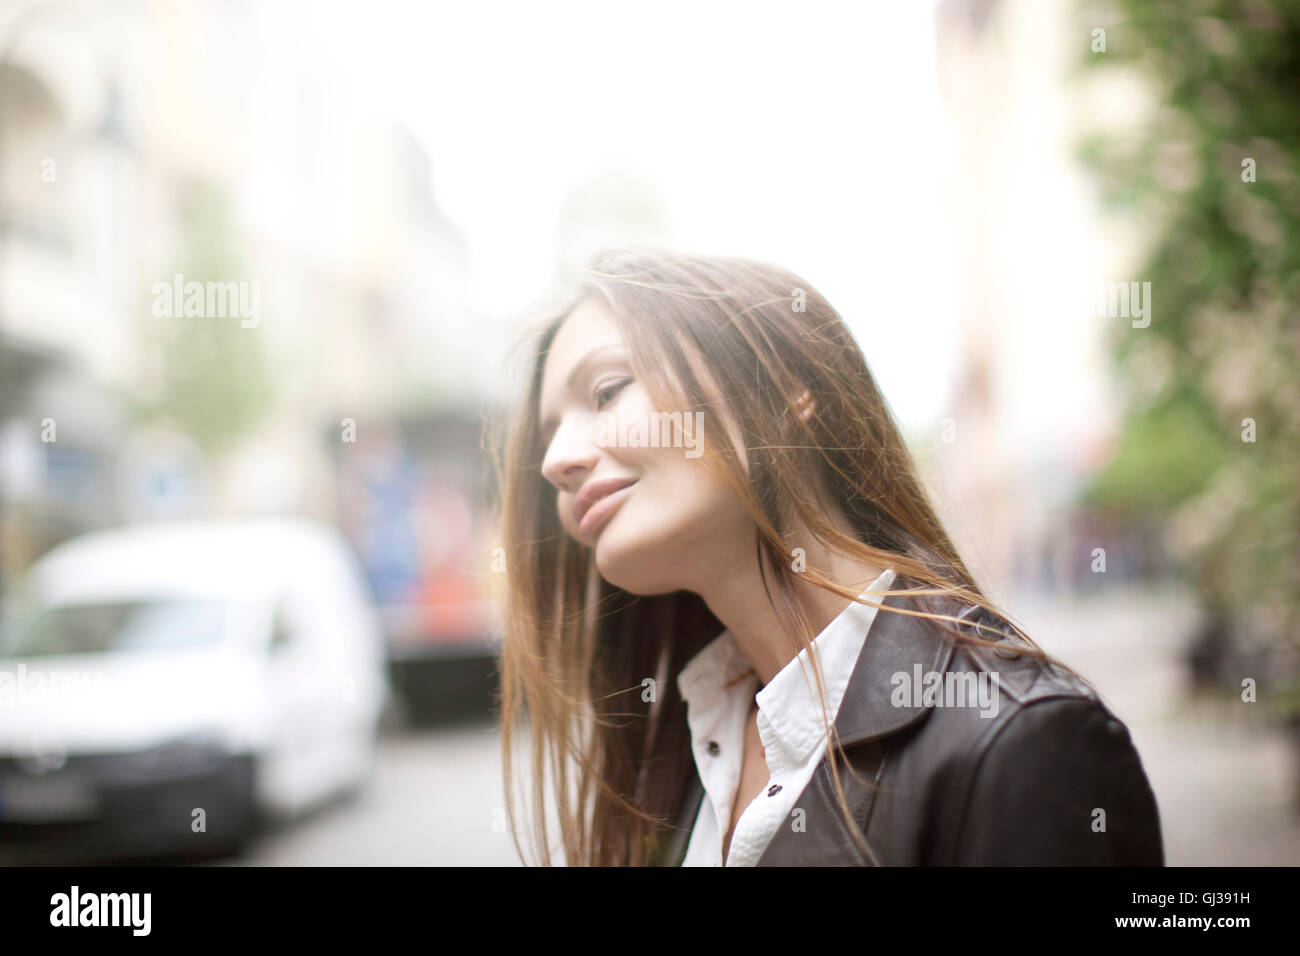 Beautiful woman with long brown hair on city street Stock Photo